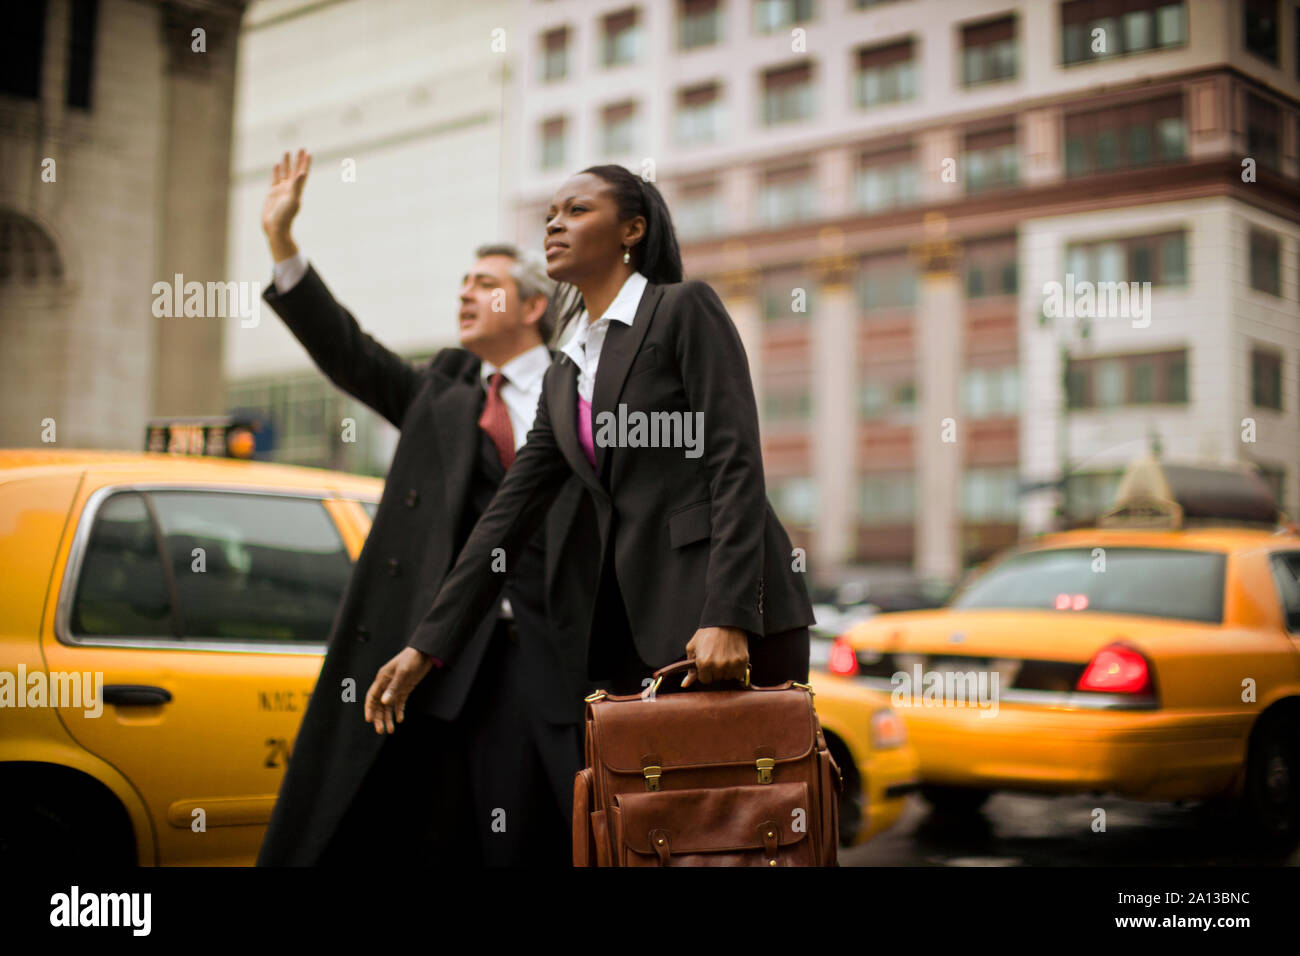 Two business colleagues hailing a taxi in a city street. Stock Photo